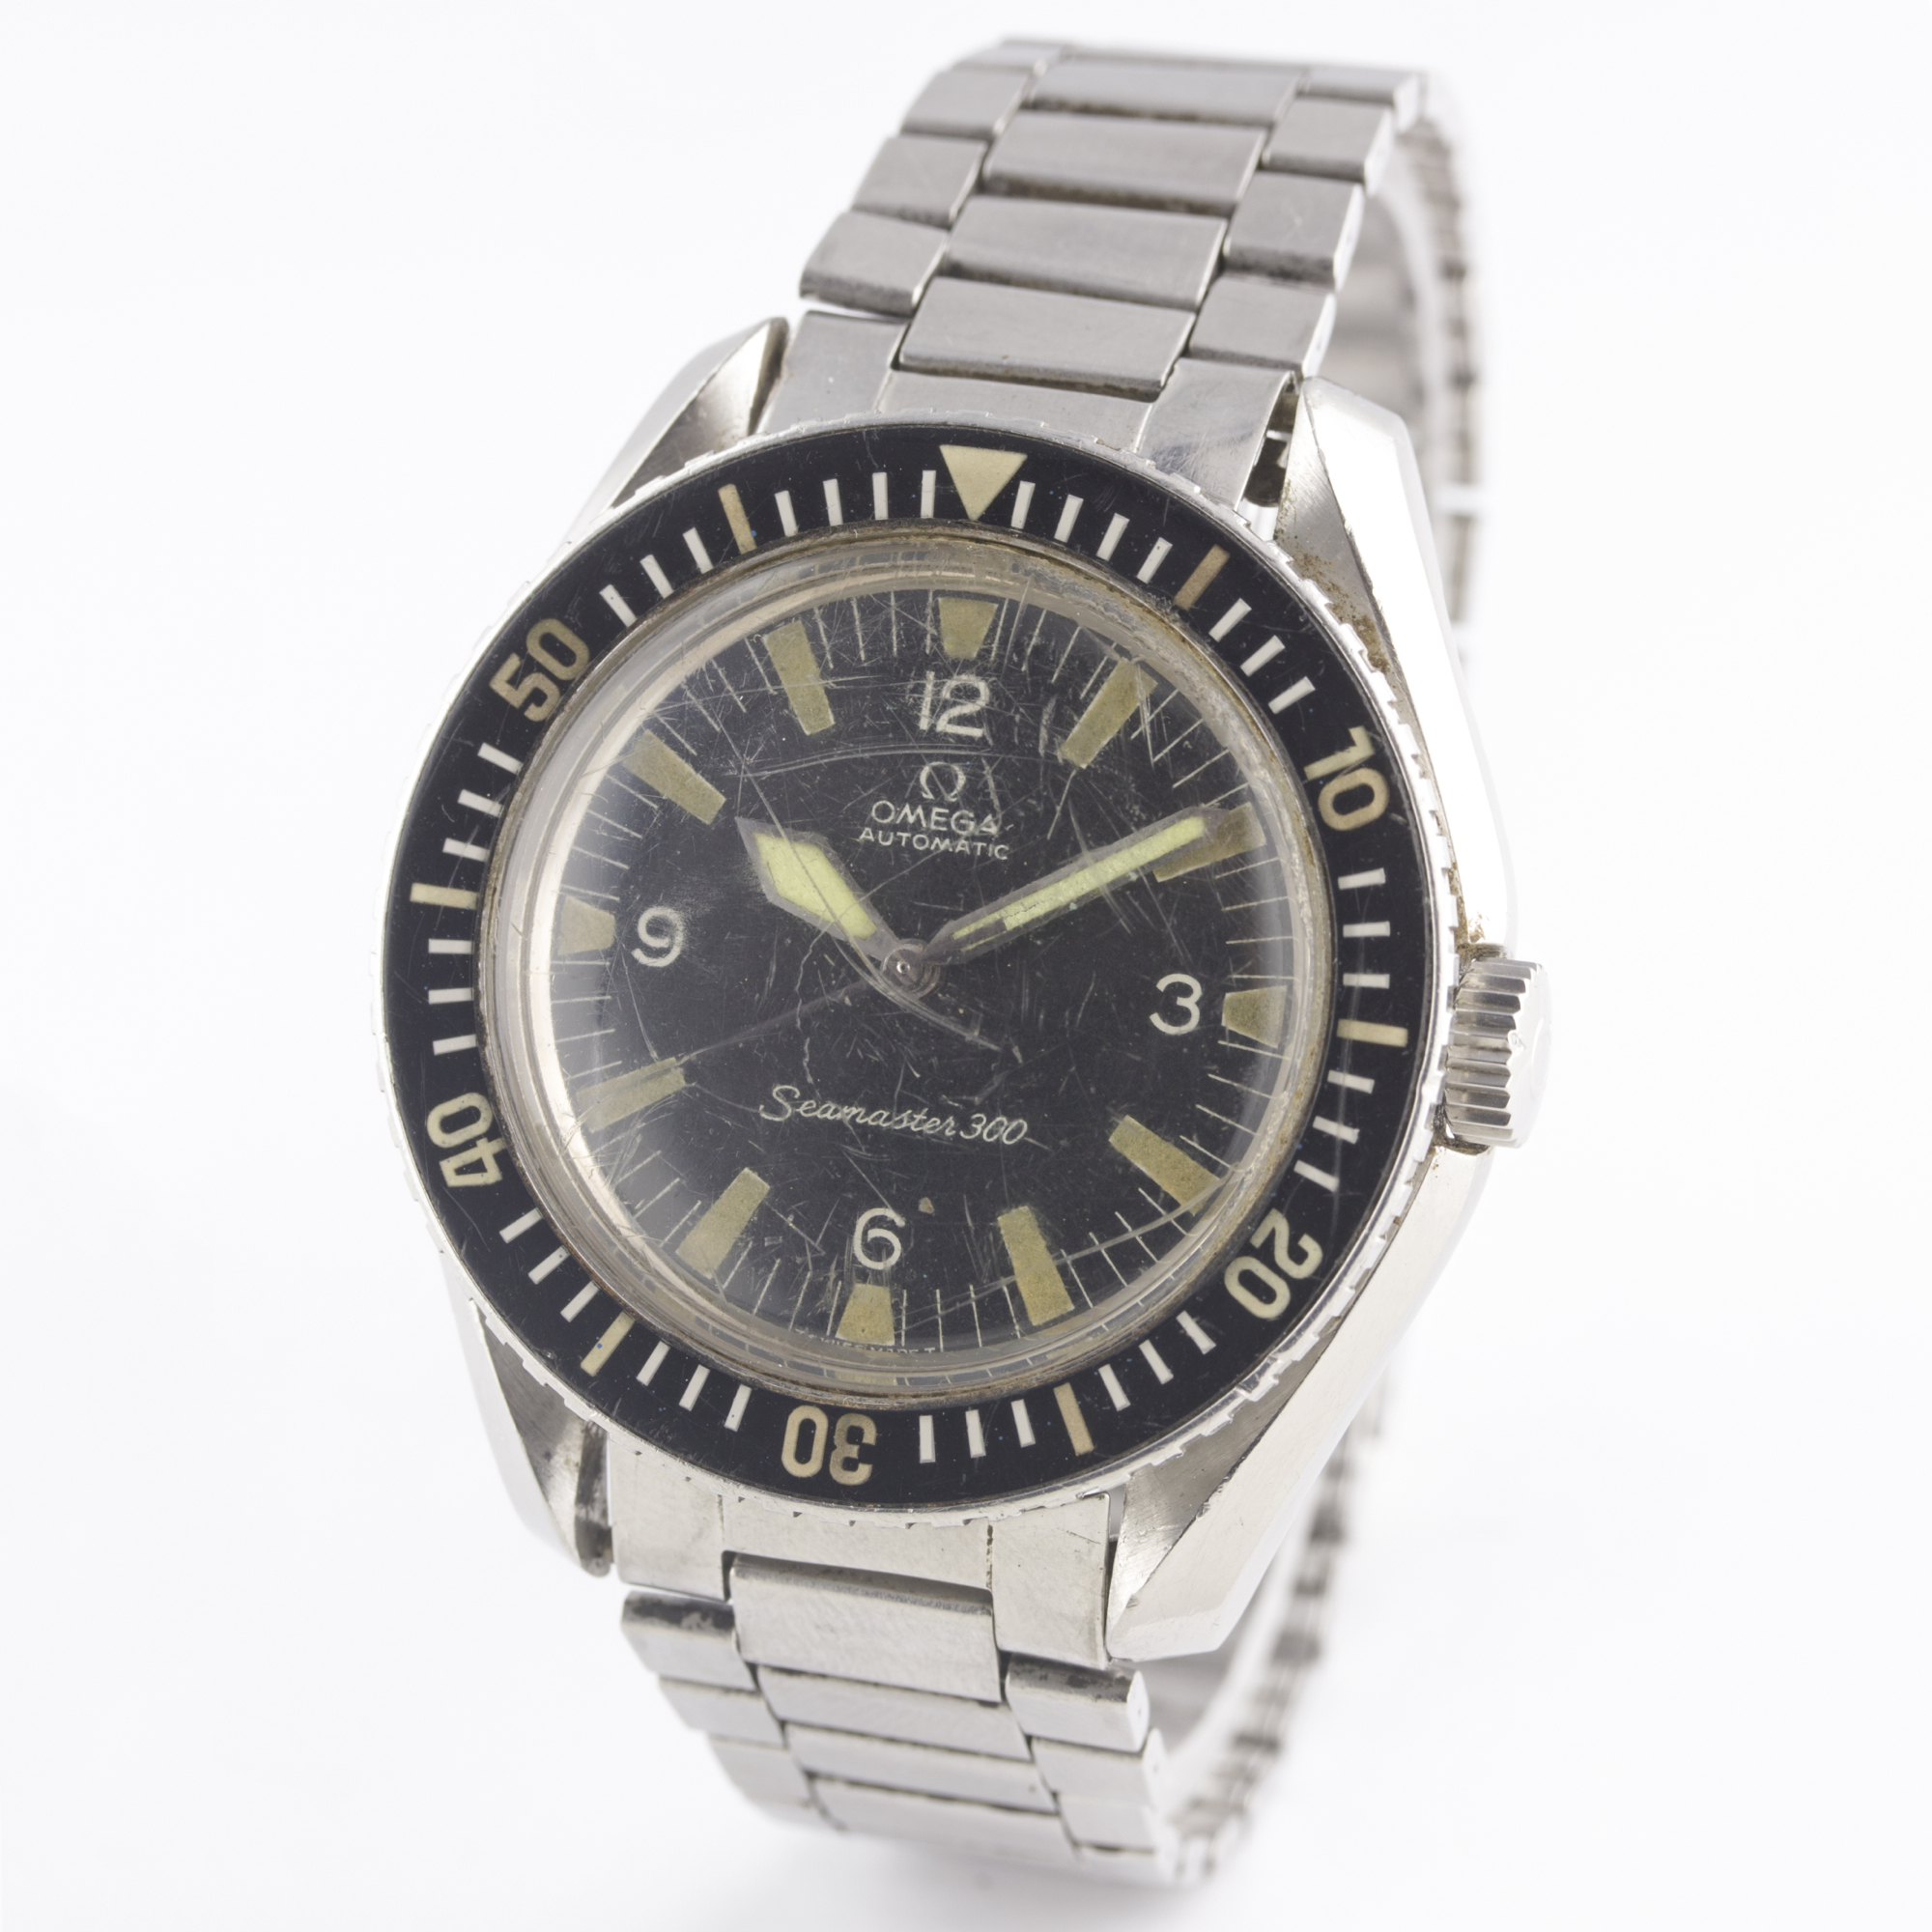 A RARE GENTLEMAN'S STAINLESS STEEL OMEGA SEAMASTER 300 BRACELET WATCH CIRCA 1967, REF. 165024 - Image 5 of 8